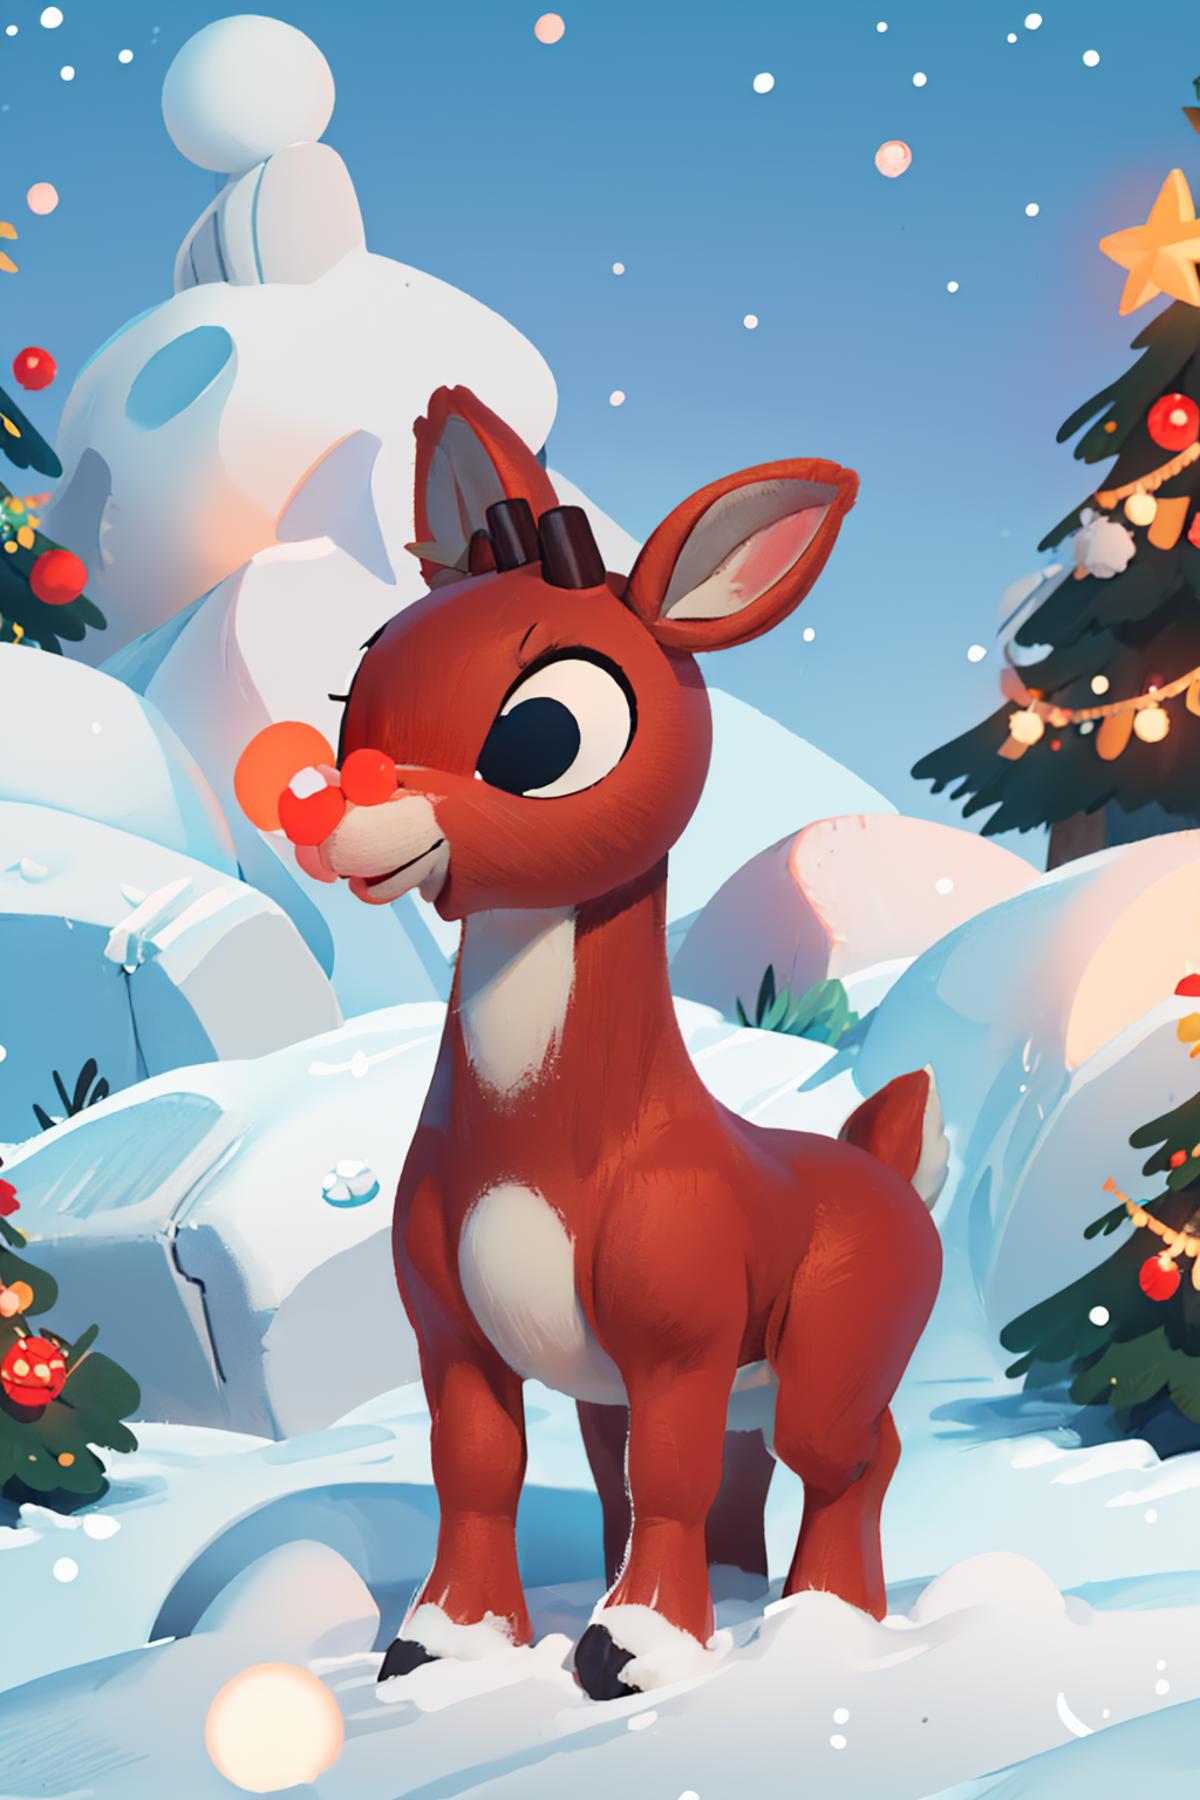 Rudolph | Rudolph the Red-Nosed Reindeer image by justTNP